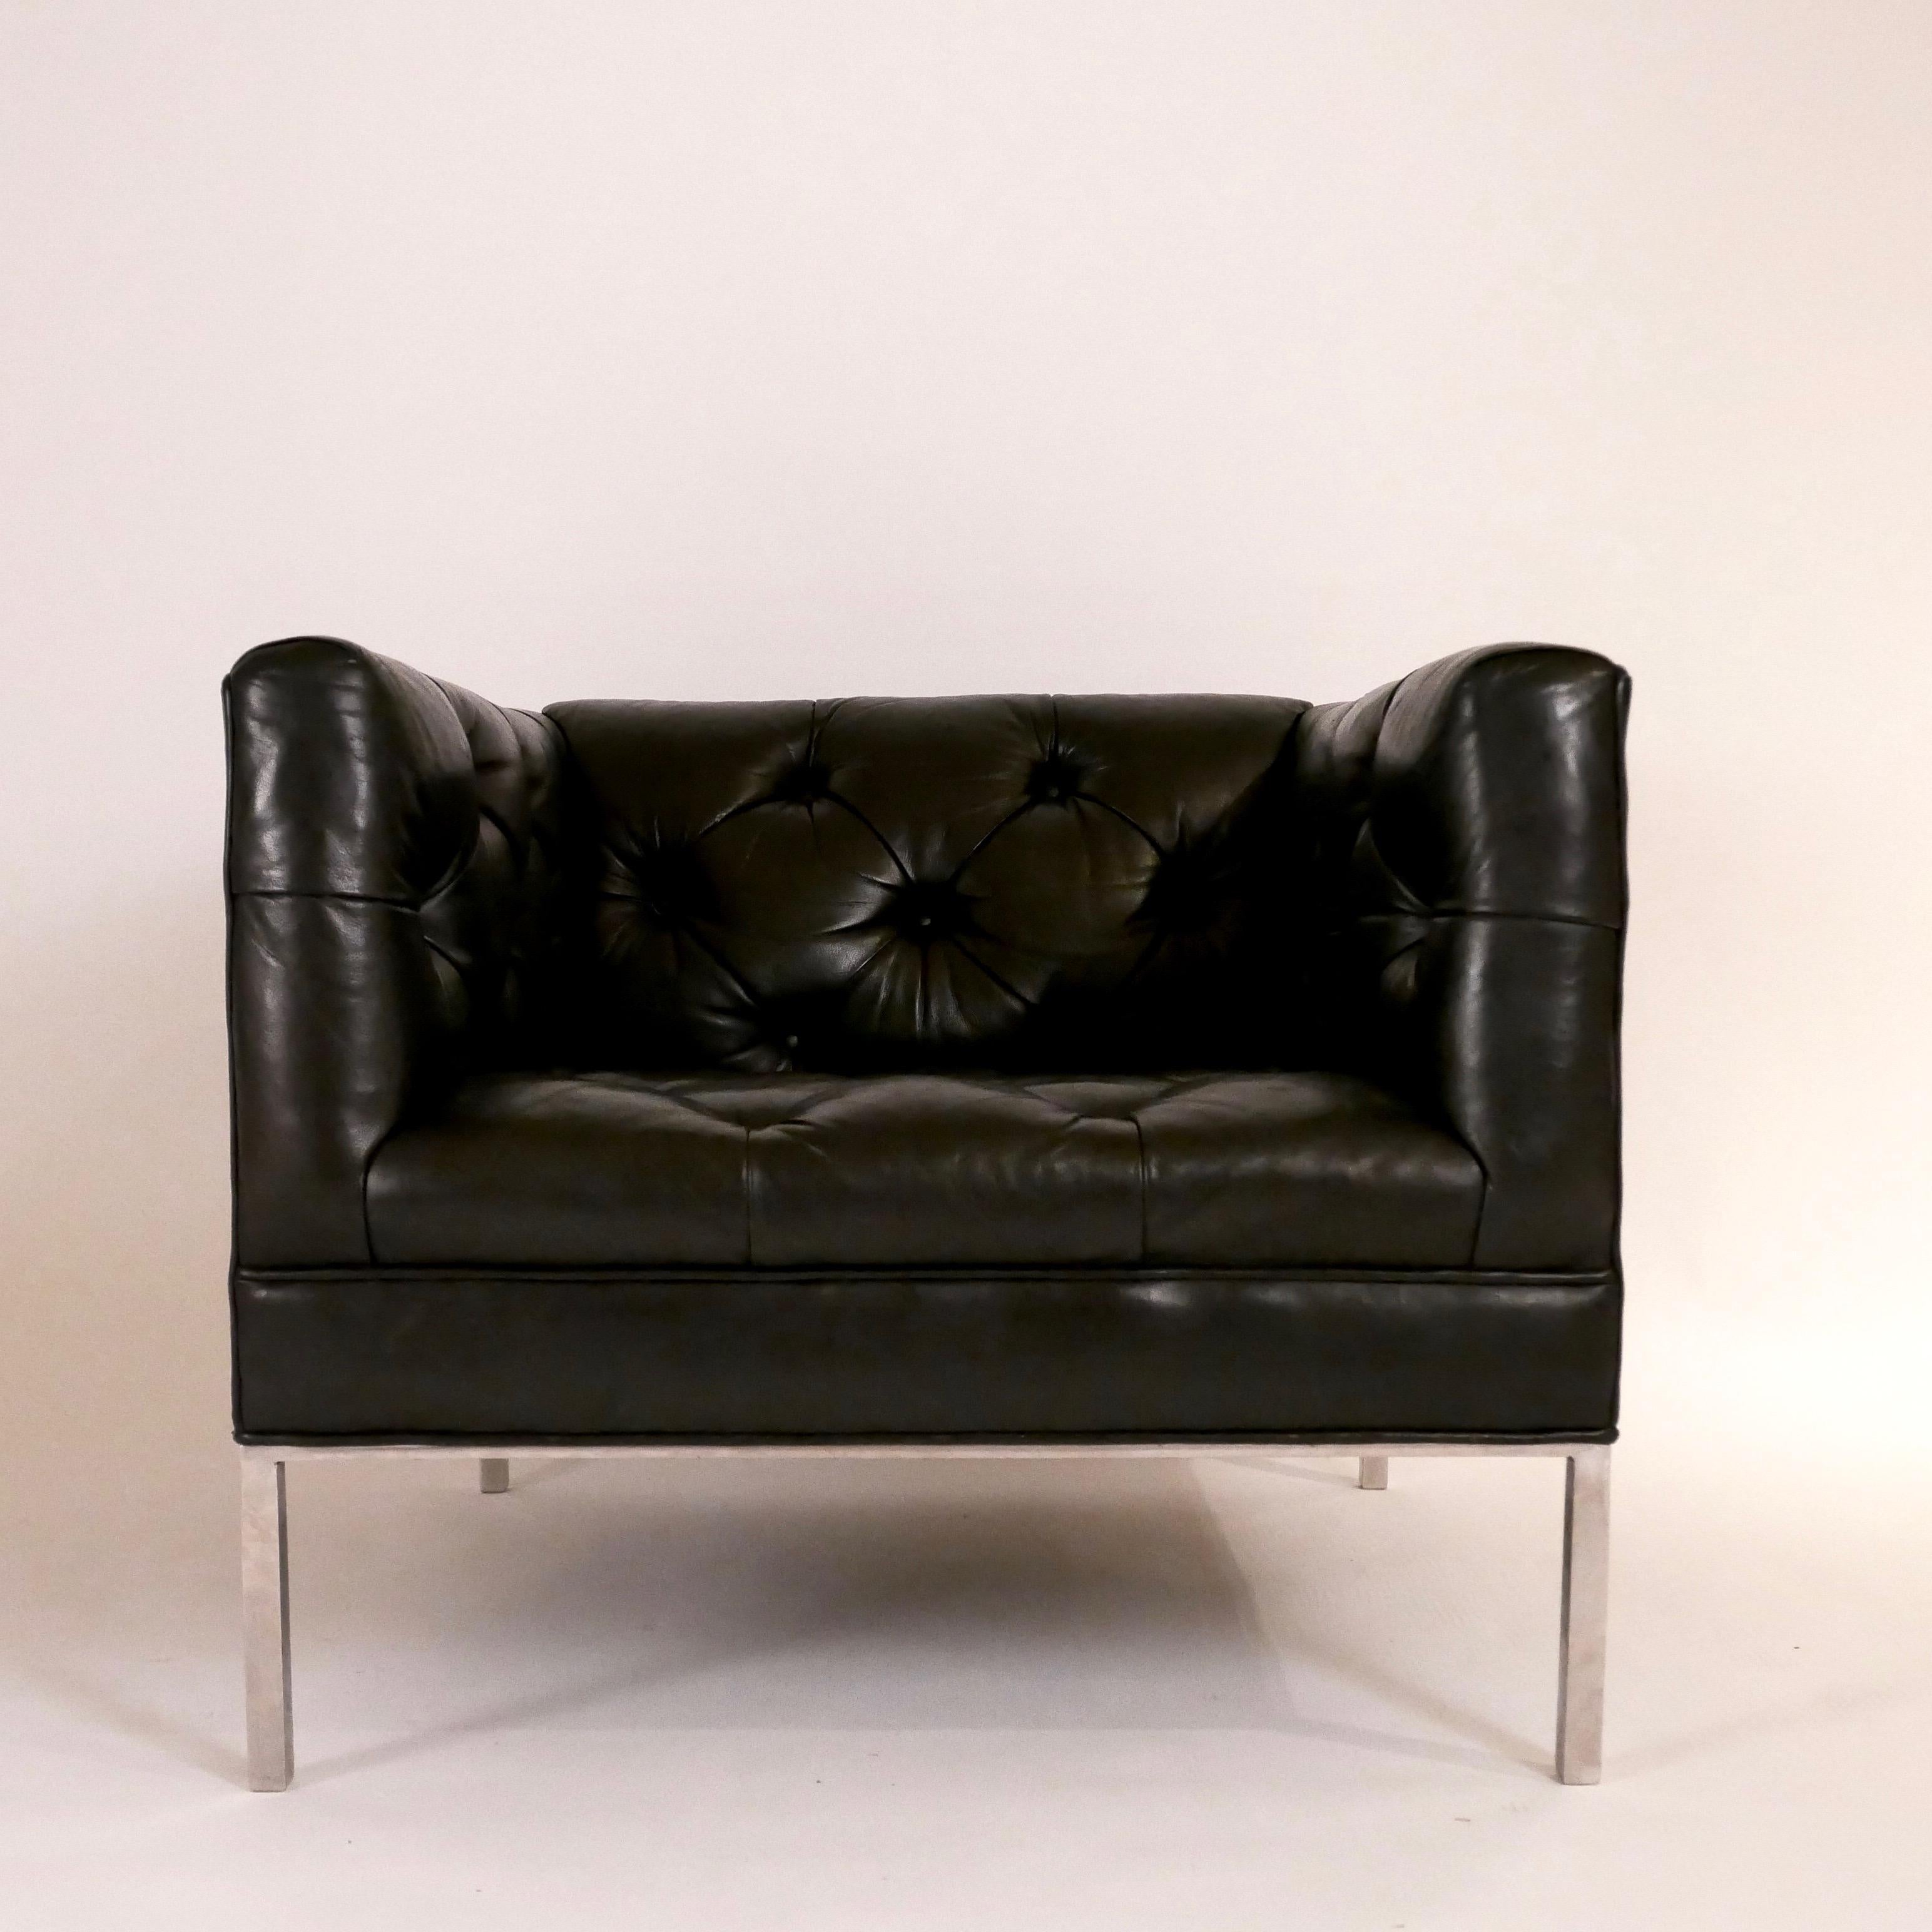 Architect Pair of Tufted Leather and Solid Stainless Steel Tuxedo Club Chairs 4